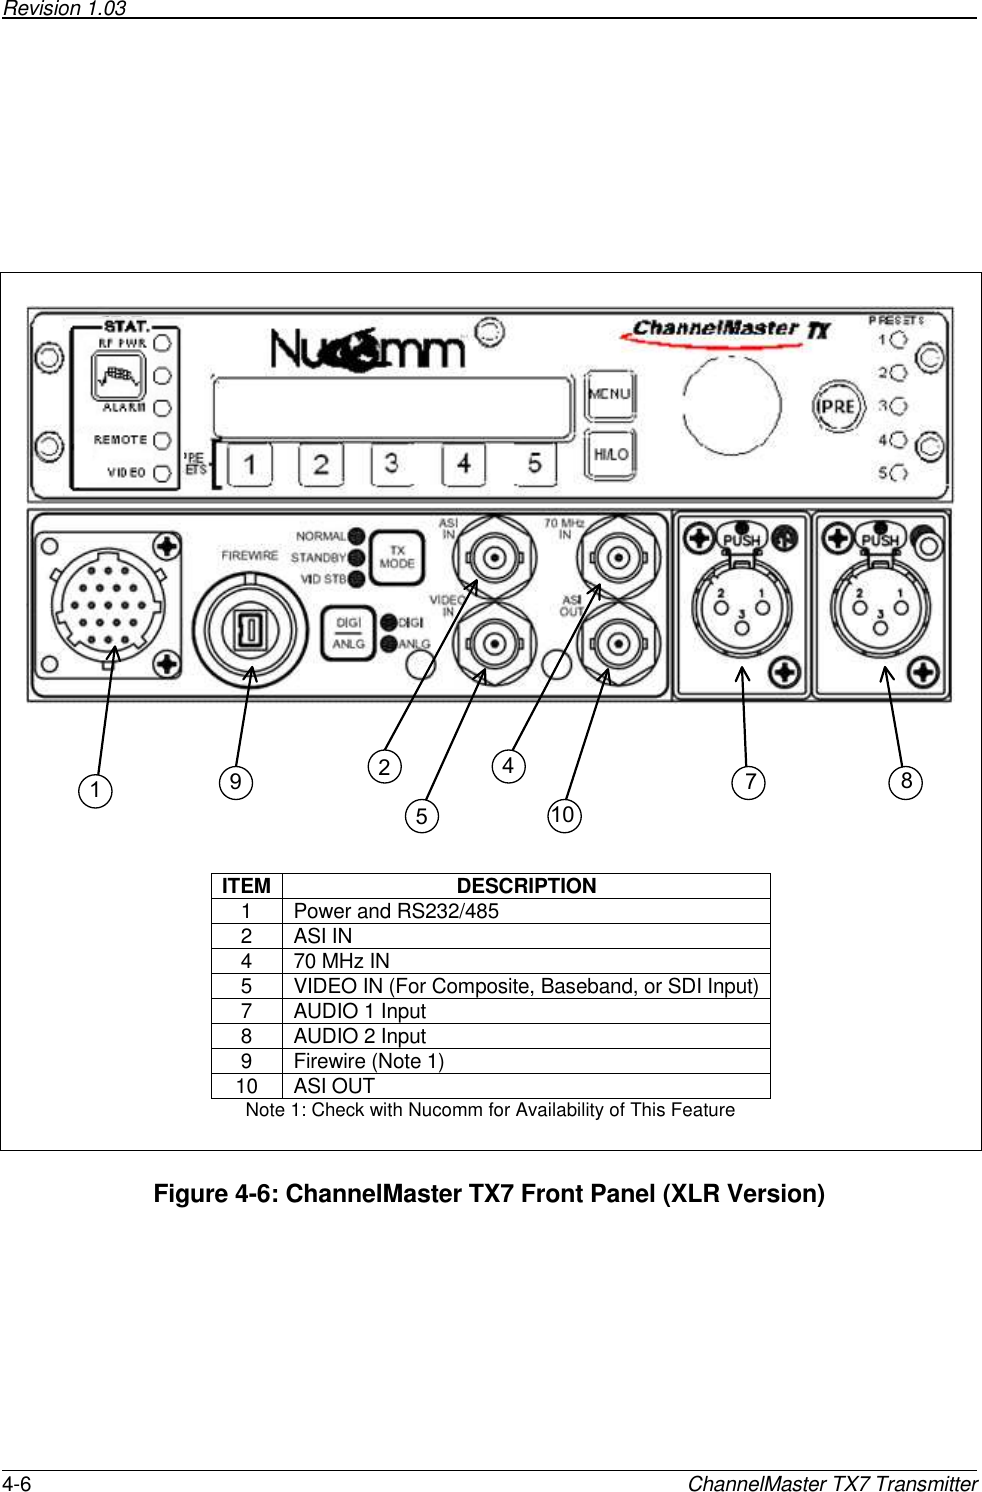 Revision 1.03       4-6  ChannelMaster TX7 Transmitter           124578910  ITEM DESCRIPTION 1  Power and RS232/485 2  ASI IN 4  70 MHz IN 5  VIDEO IN (For Composite, Baseband, or SDI Input) 7  AUDIO 1 Input 8  AUDIO 2 Input 9  Firewire (Note 1) 10  ASI OUT Note 1: Check with Nucomm for Availability of This Feature   Figure 4-6: ChannelMaster TX7 Front Panel (XLR Version)     